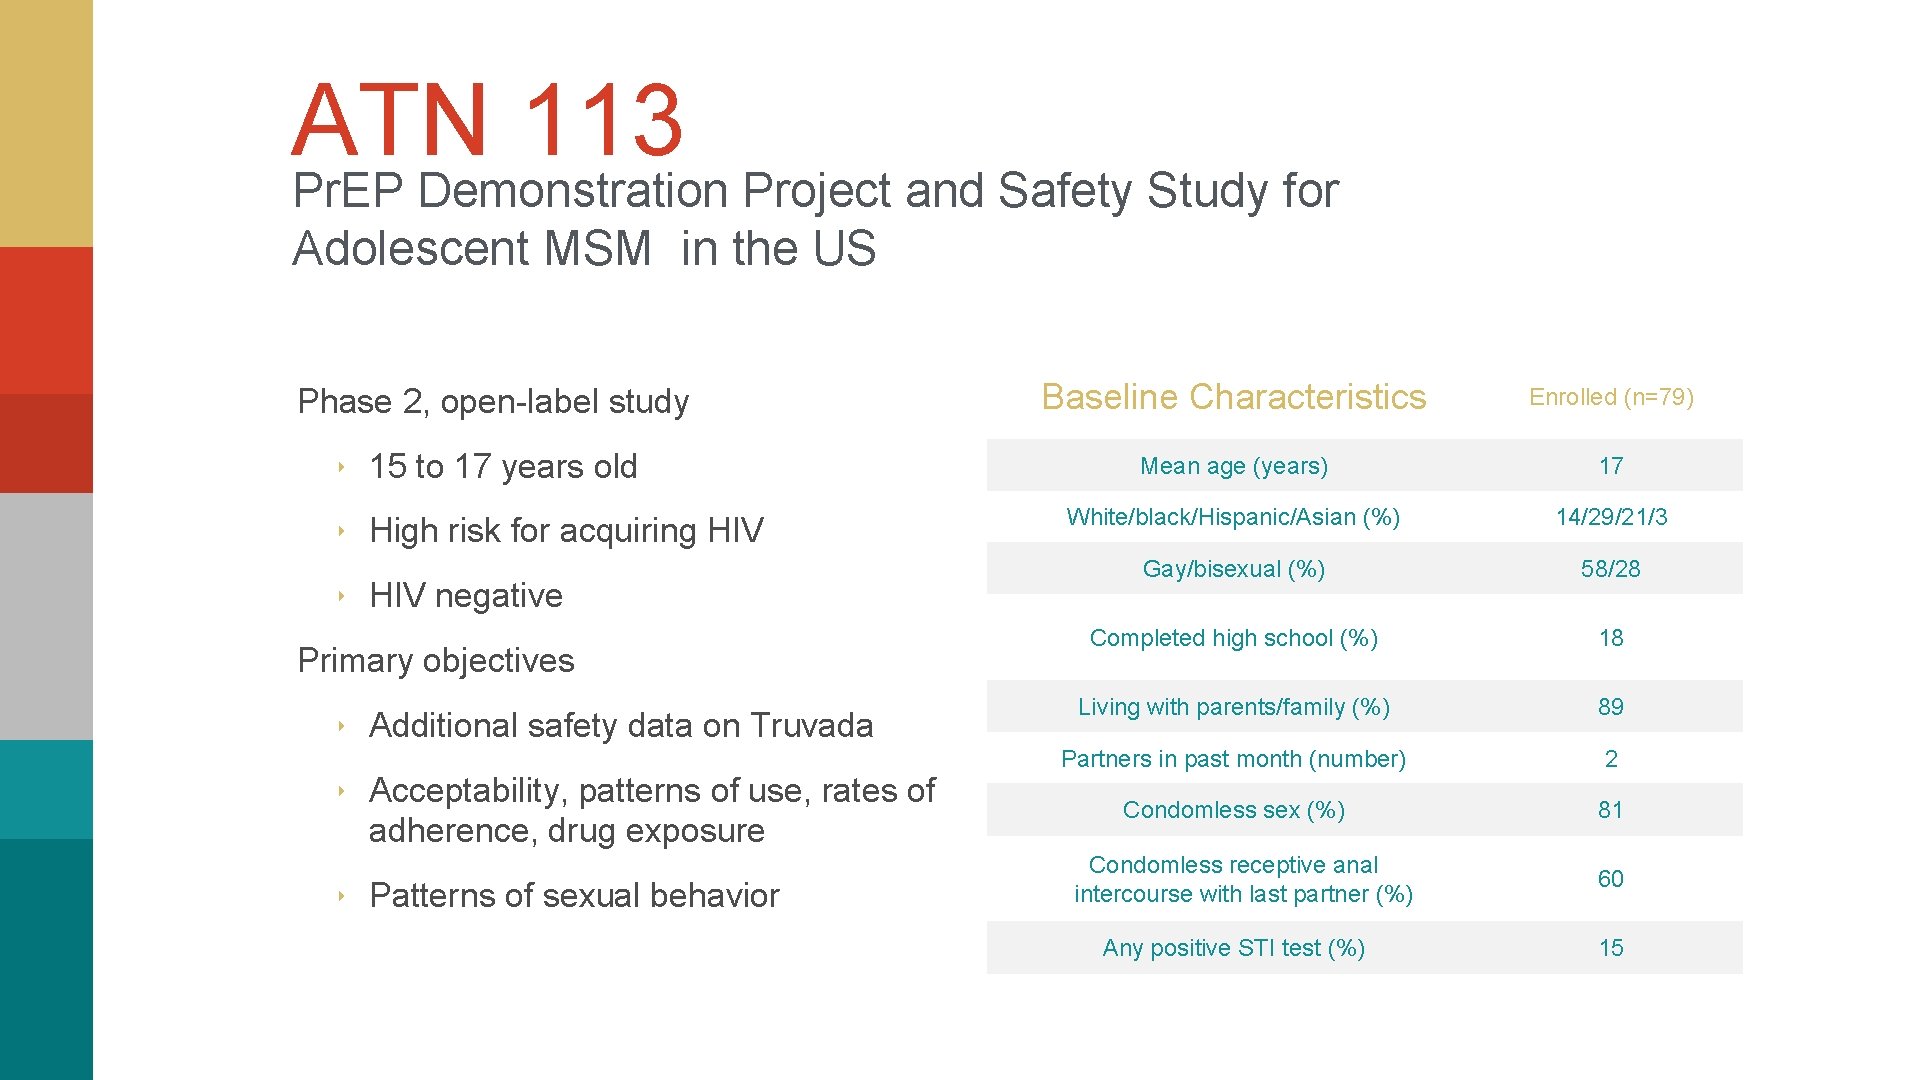 ATN 113 Pr. EP Demonstration Project and Safety Study for Adolescent MSM in the